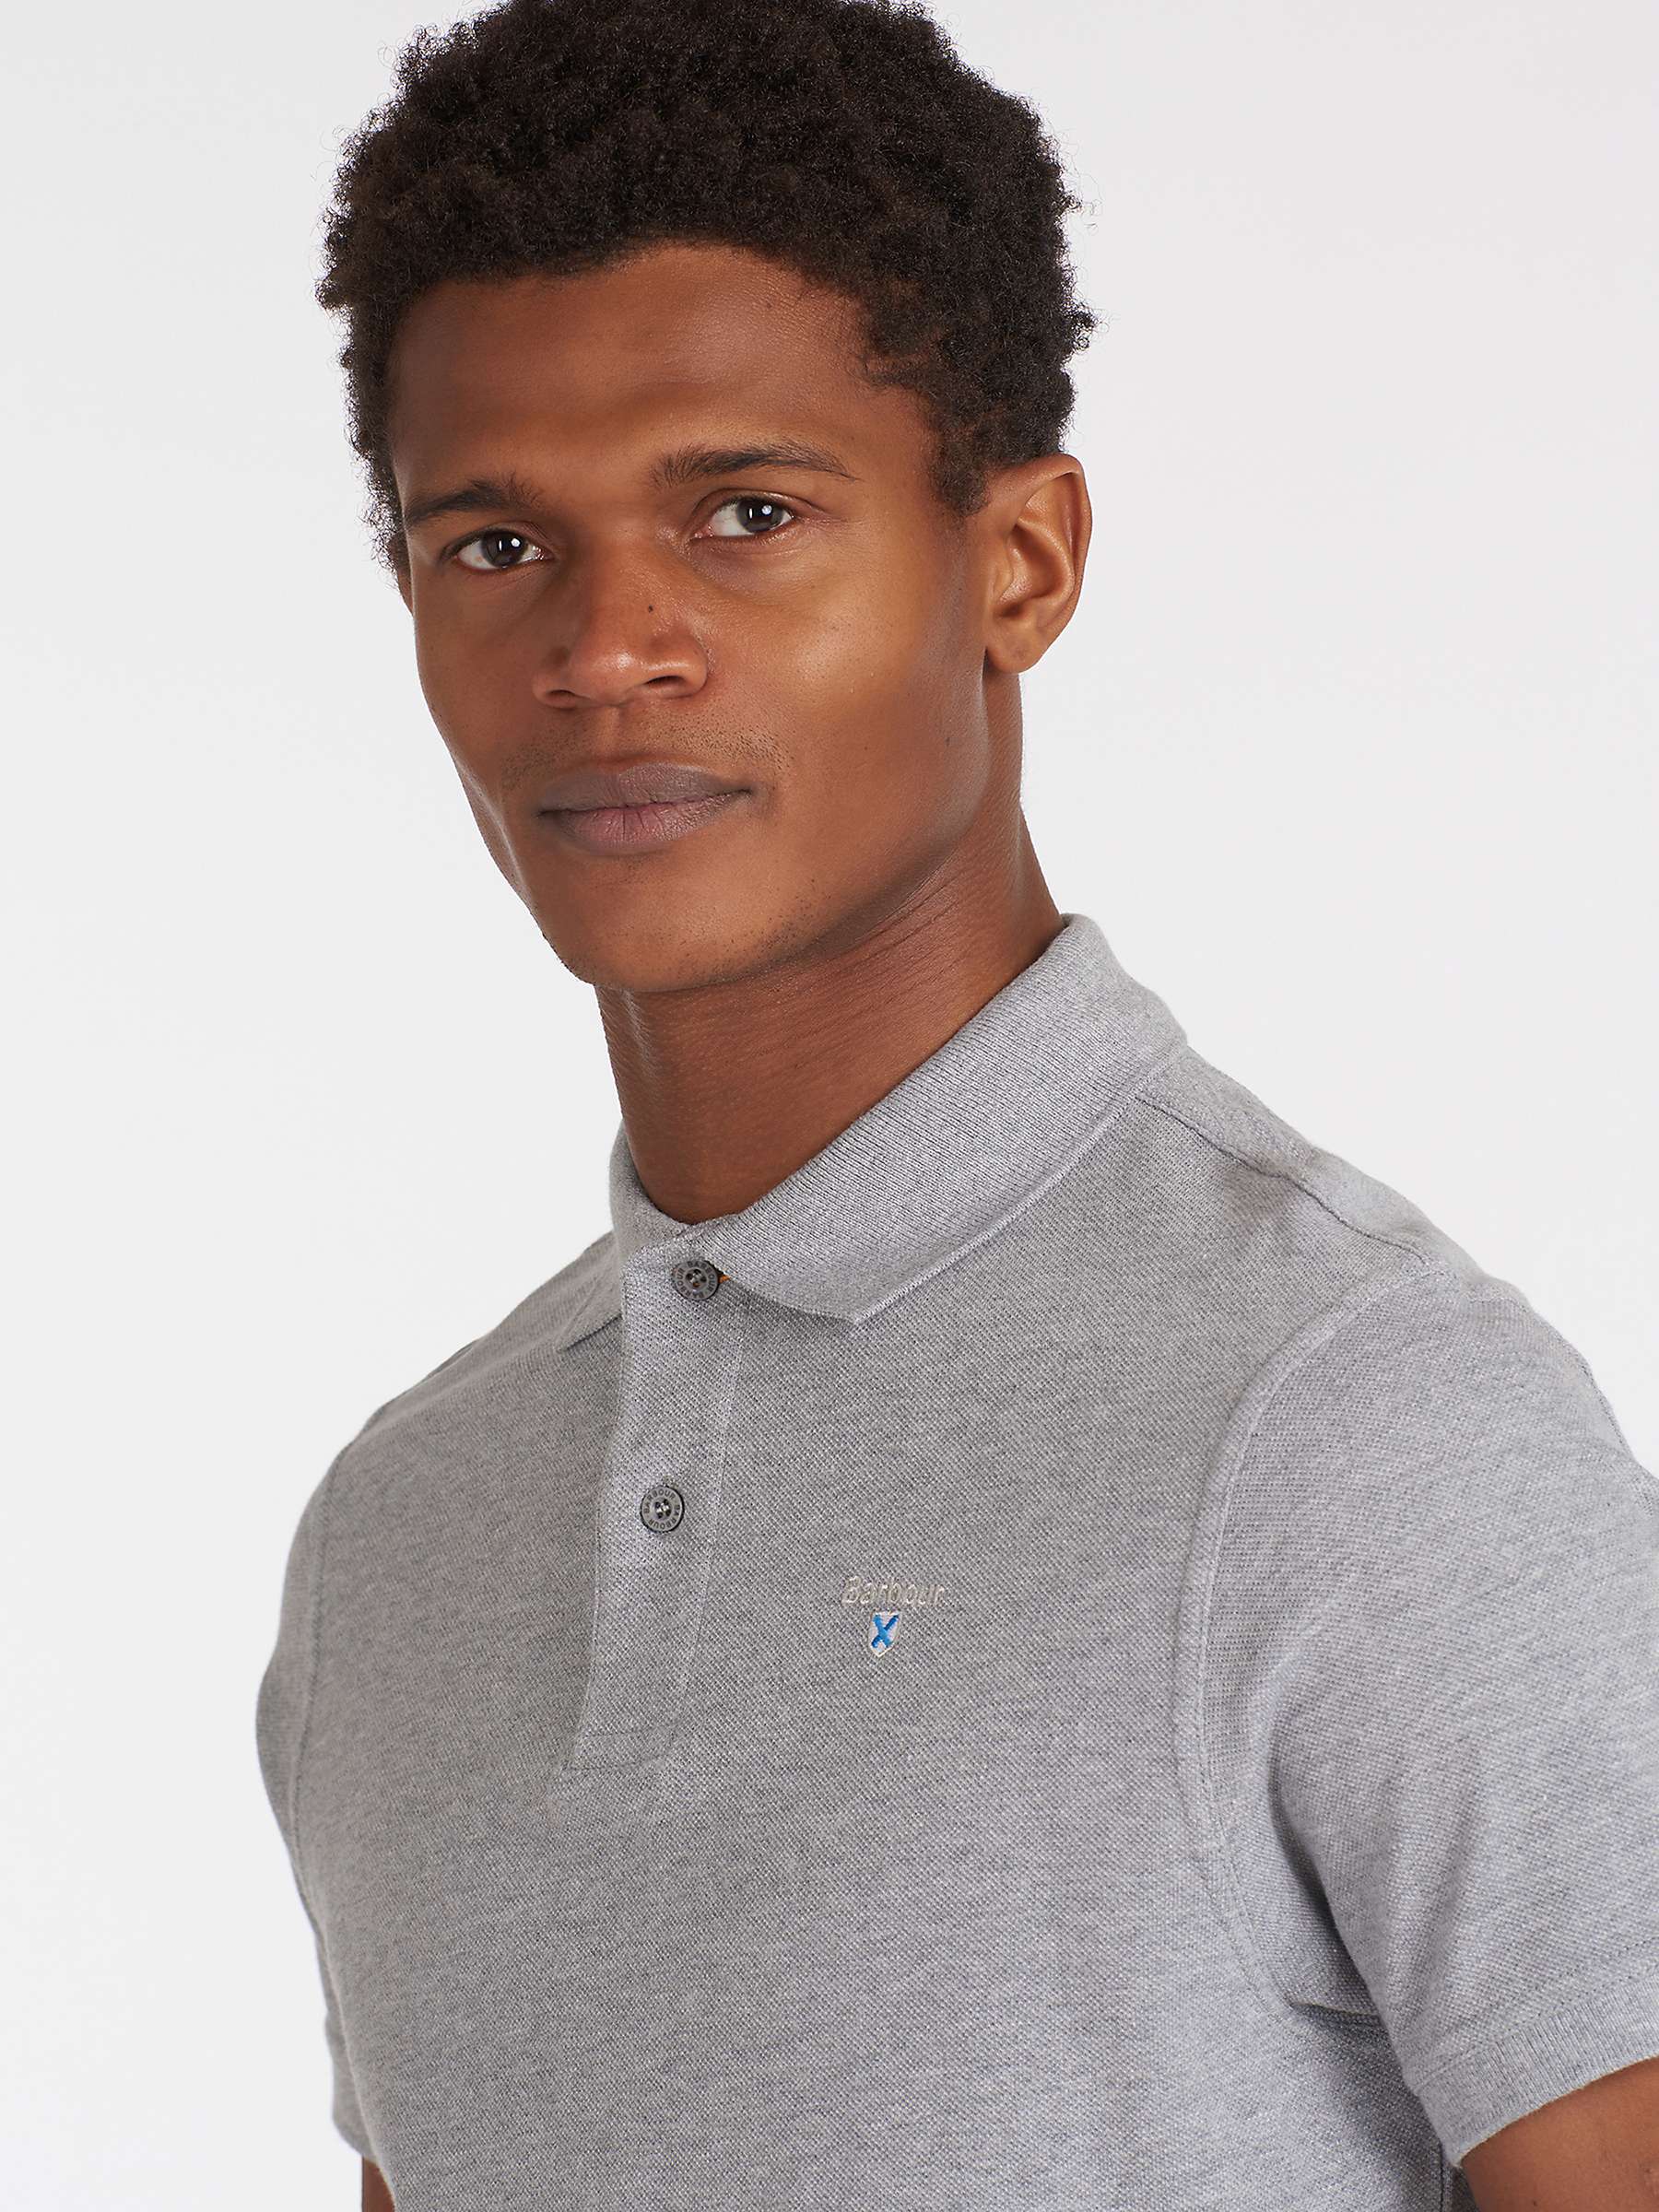 Buy Barbour Short Sleeve Sports Polo Shirt Online at johnlewis.com